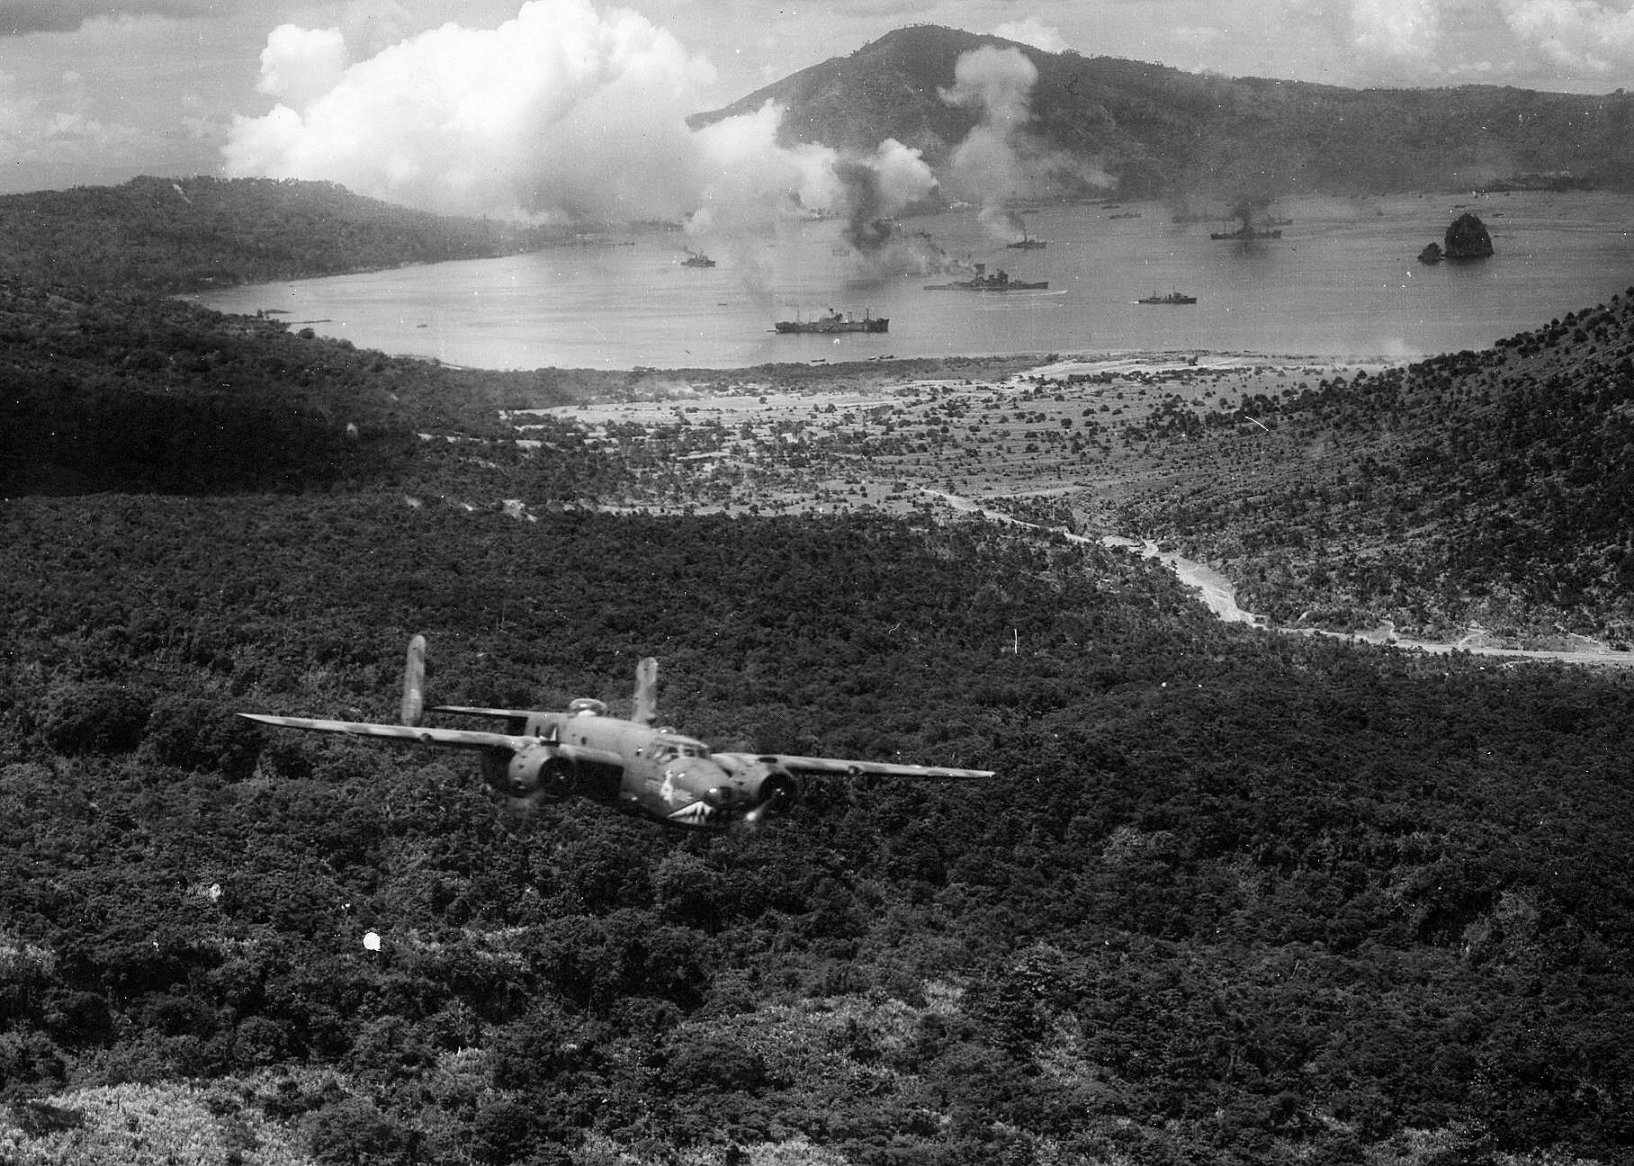 US B-25D Mitchell bomber 'Here's Howe' of the 'Grim Reapers' 3rd Bombardment Group, 'Pair-O-Dice' 90th Bombardment Squadron executing a low level attack on Japanese shipping, Rabaul, New Britain, Nov 2 1943